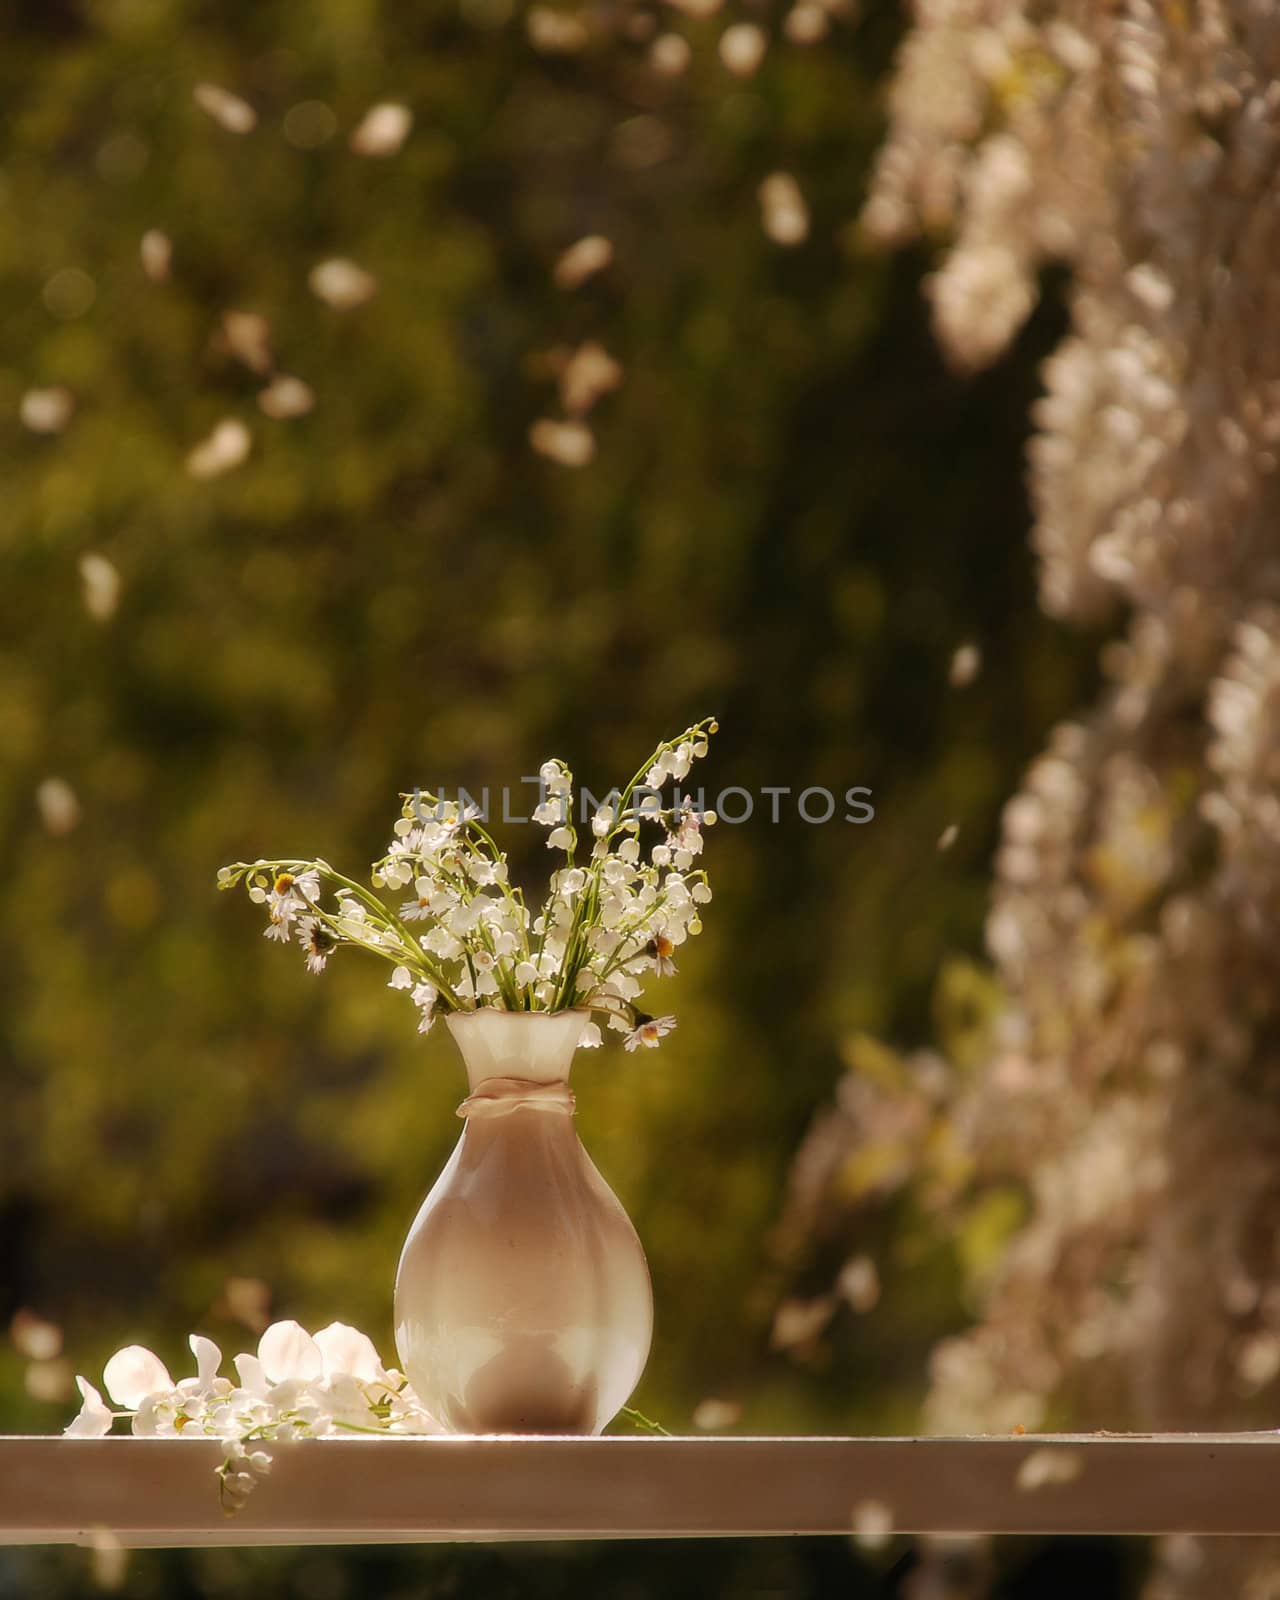 A stillife with sun shine and lily-of-the-valley